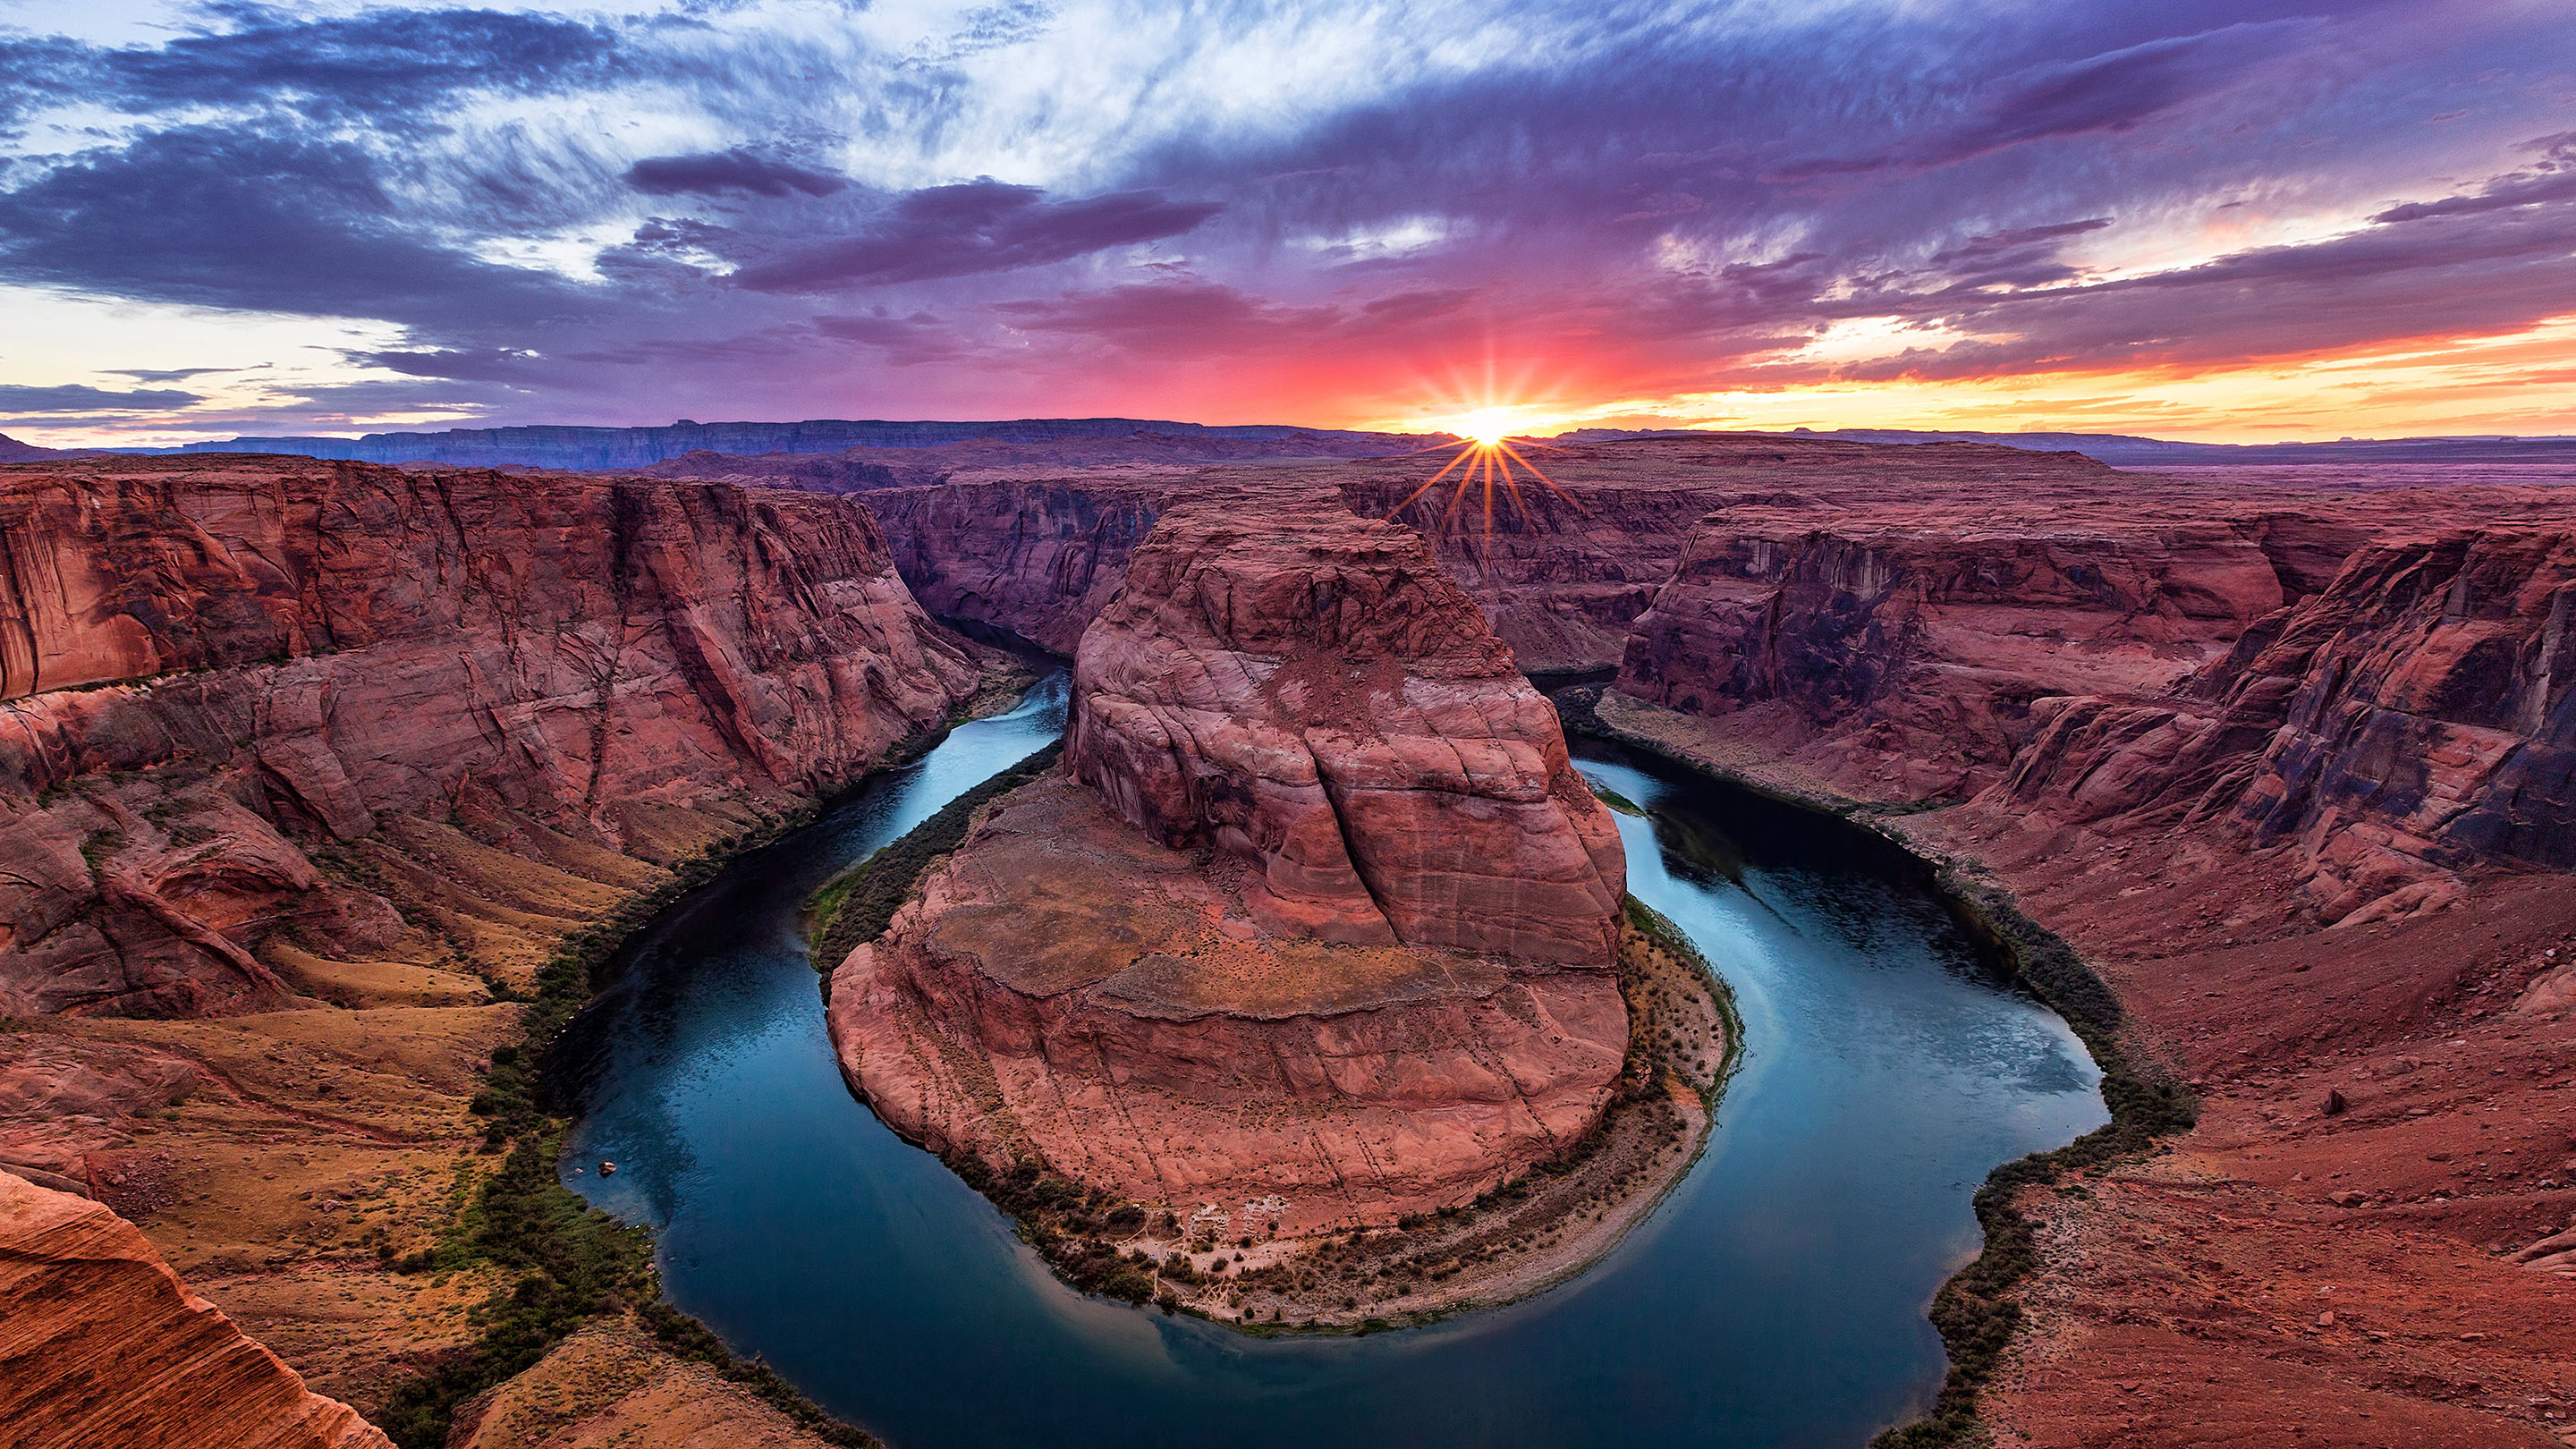 Fine Art Limited Edition Print Wall Corporate Decoration Interior Design Paul Reiffer Photographer Photography High End Landscape Cityscape Buy Own Investment Eye Wonder Horseshoe Bend Arizona